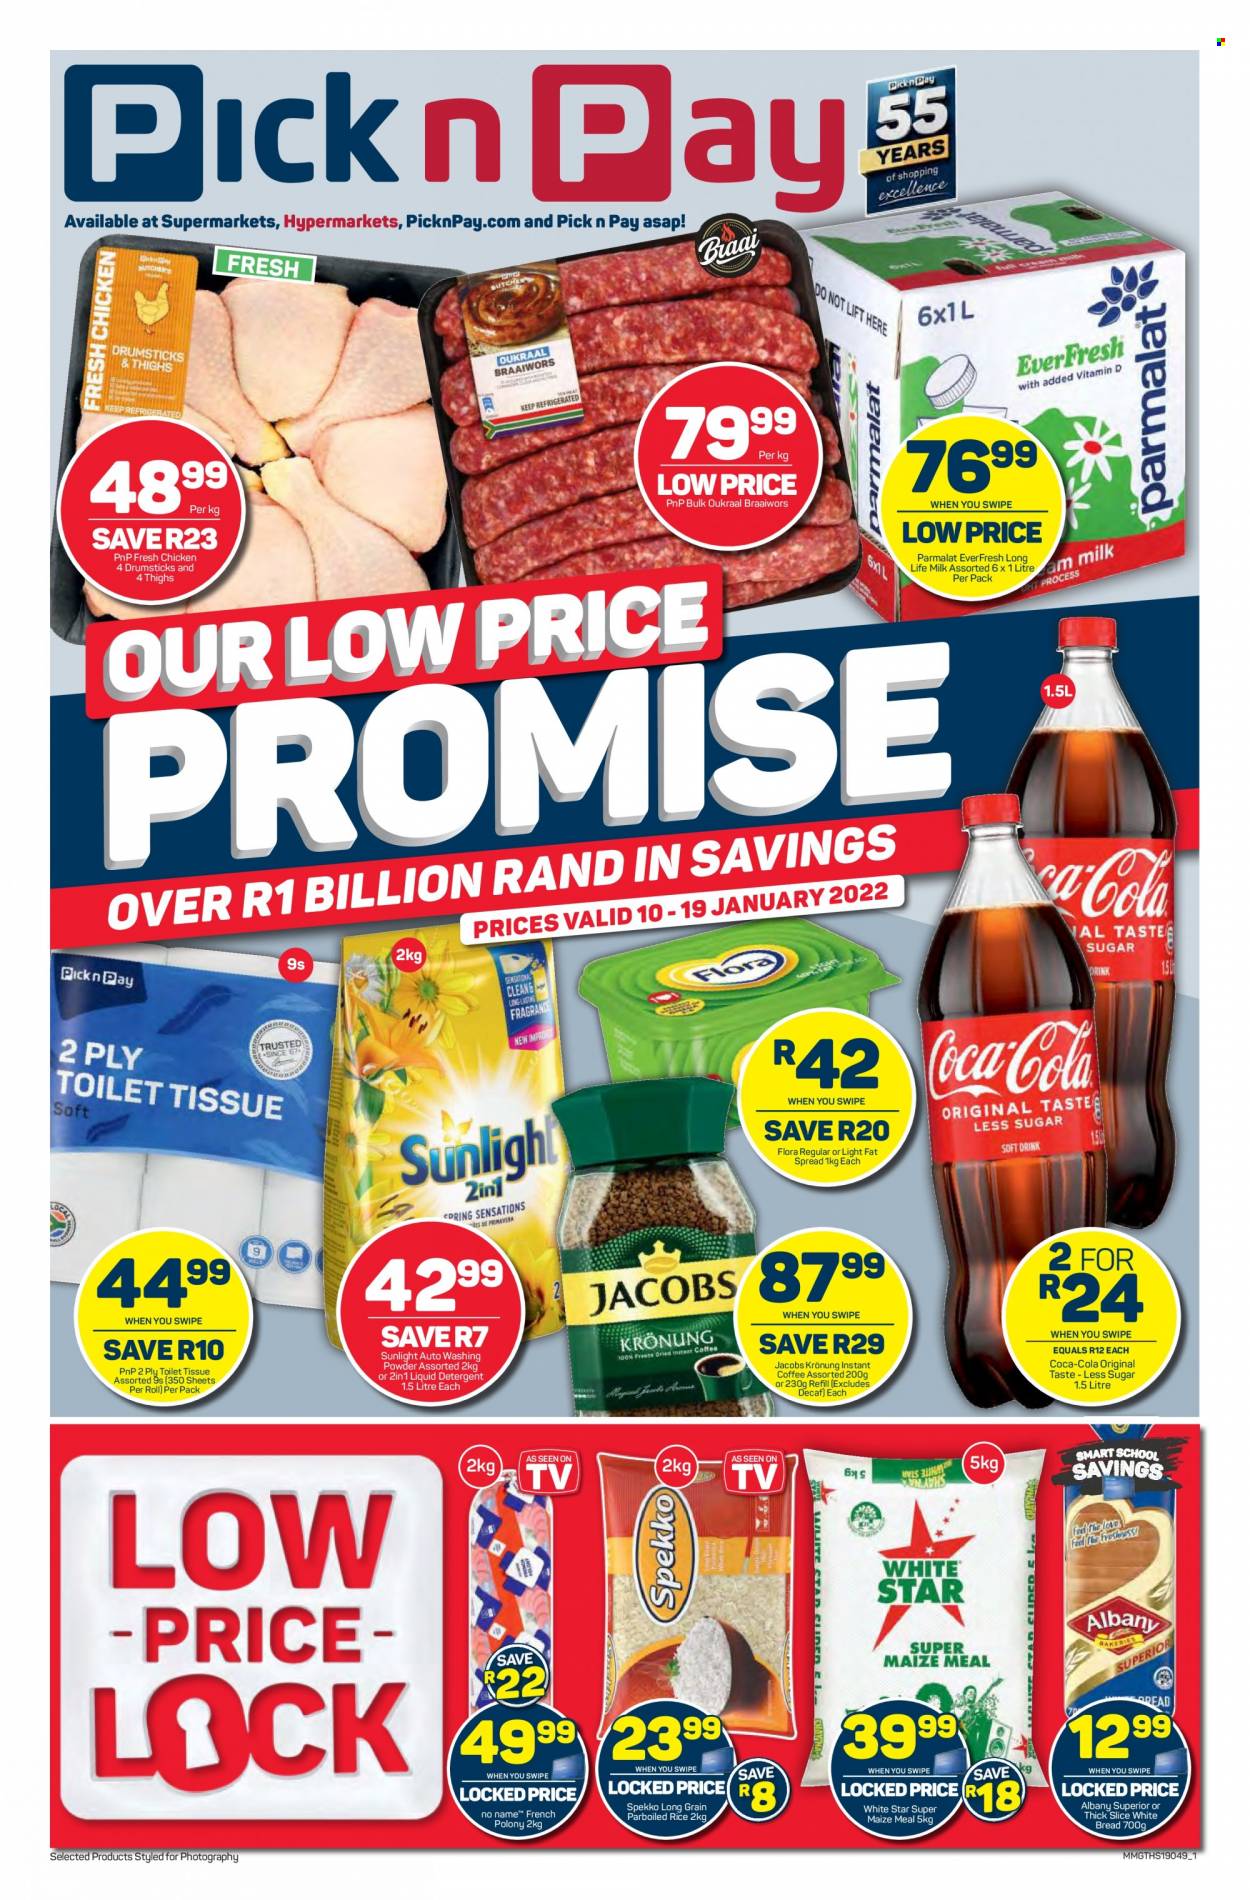 Pick n Pay catalogue  - 10/01/2022 - 19/01/2022 - Sales products - bread, white bread, french polony, polony, Parmalat, milk, long life milk, fat spread, Flora, maize meal, White Star, rice, parboiled rice, Spekko, Coca-Cola, instant coffee, Jacobs, Jacobs Krönung, chicken drumsticks, toilet paper, detergent, liquid detergent, laundry powder, Sunlight. Page 1.